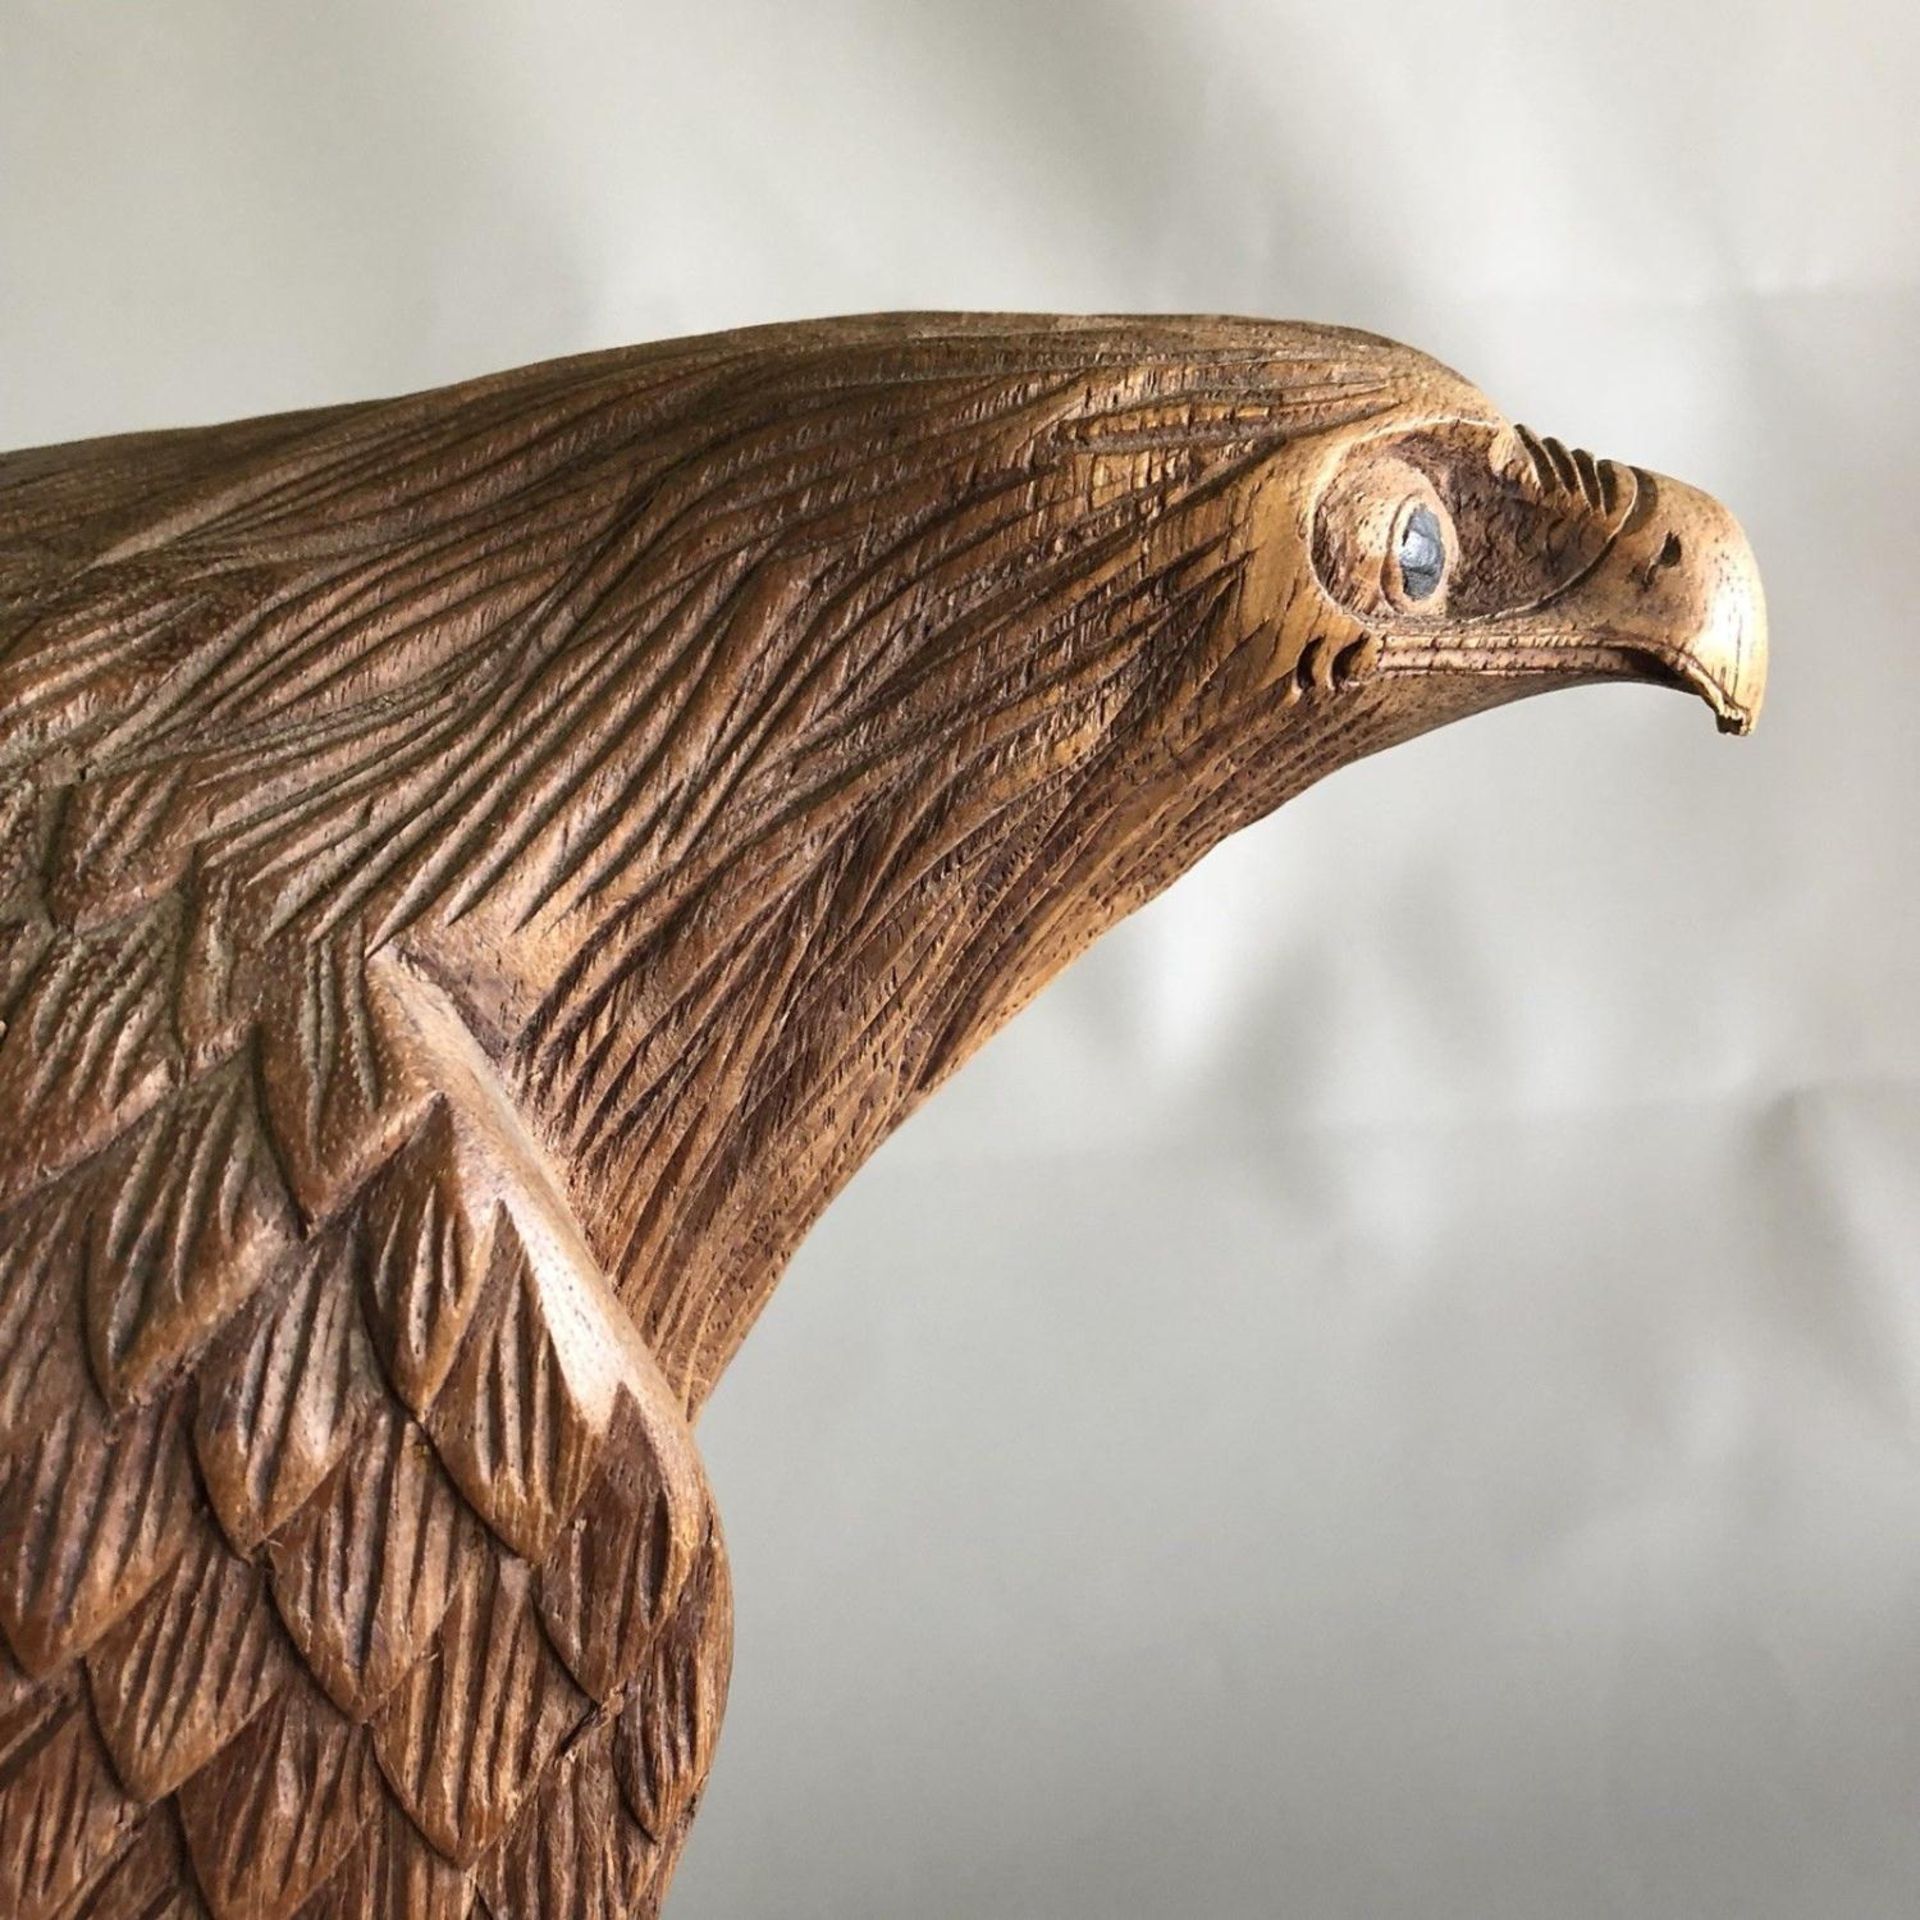 Beautiful large carved wood/wooden figure of a Golden Eagle - 38cm (15 inches) - Image 9 of 9